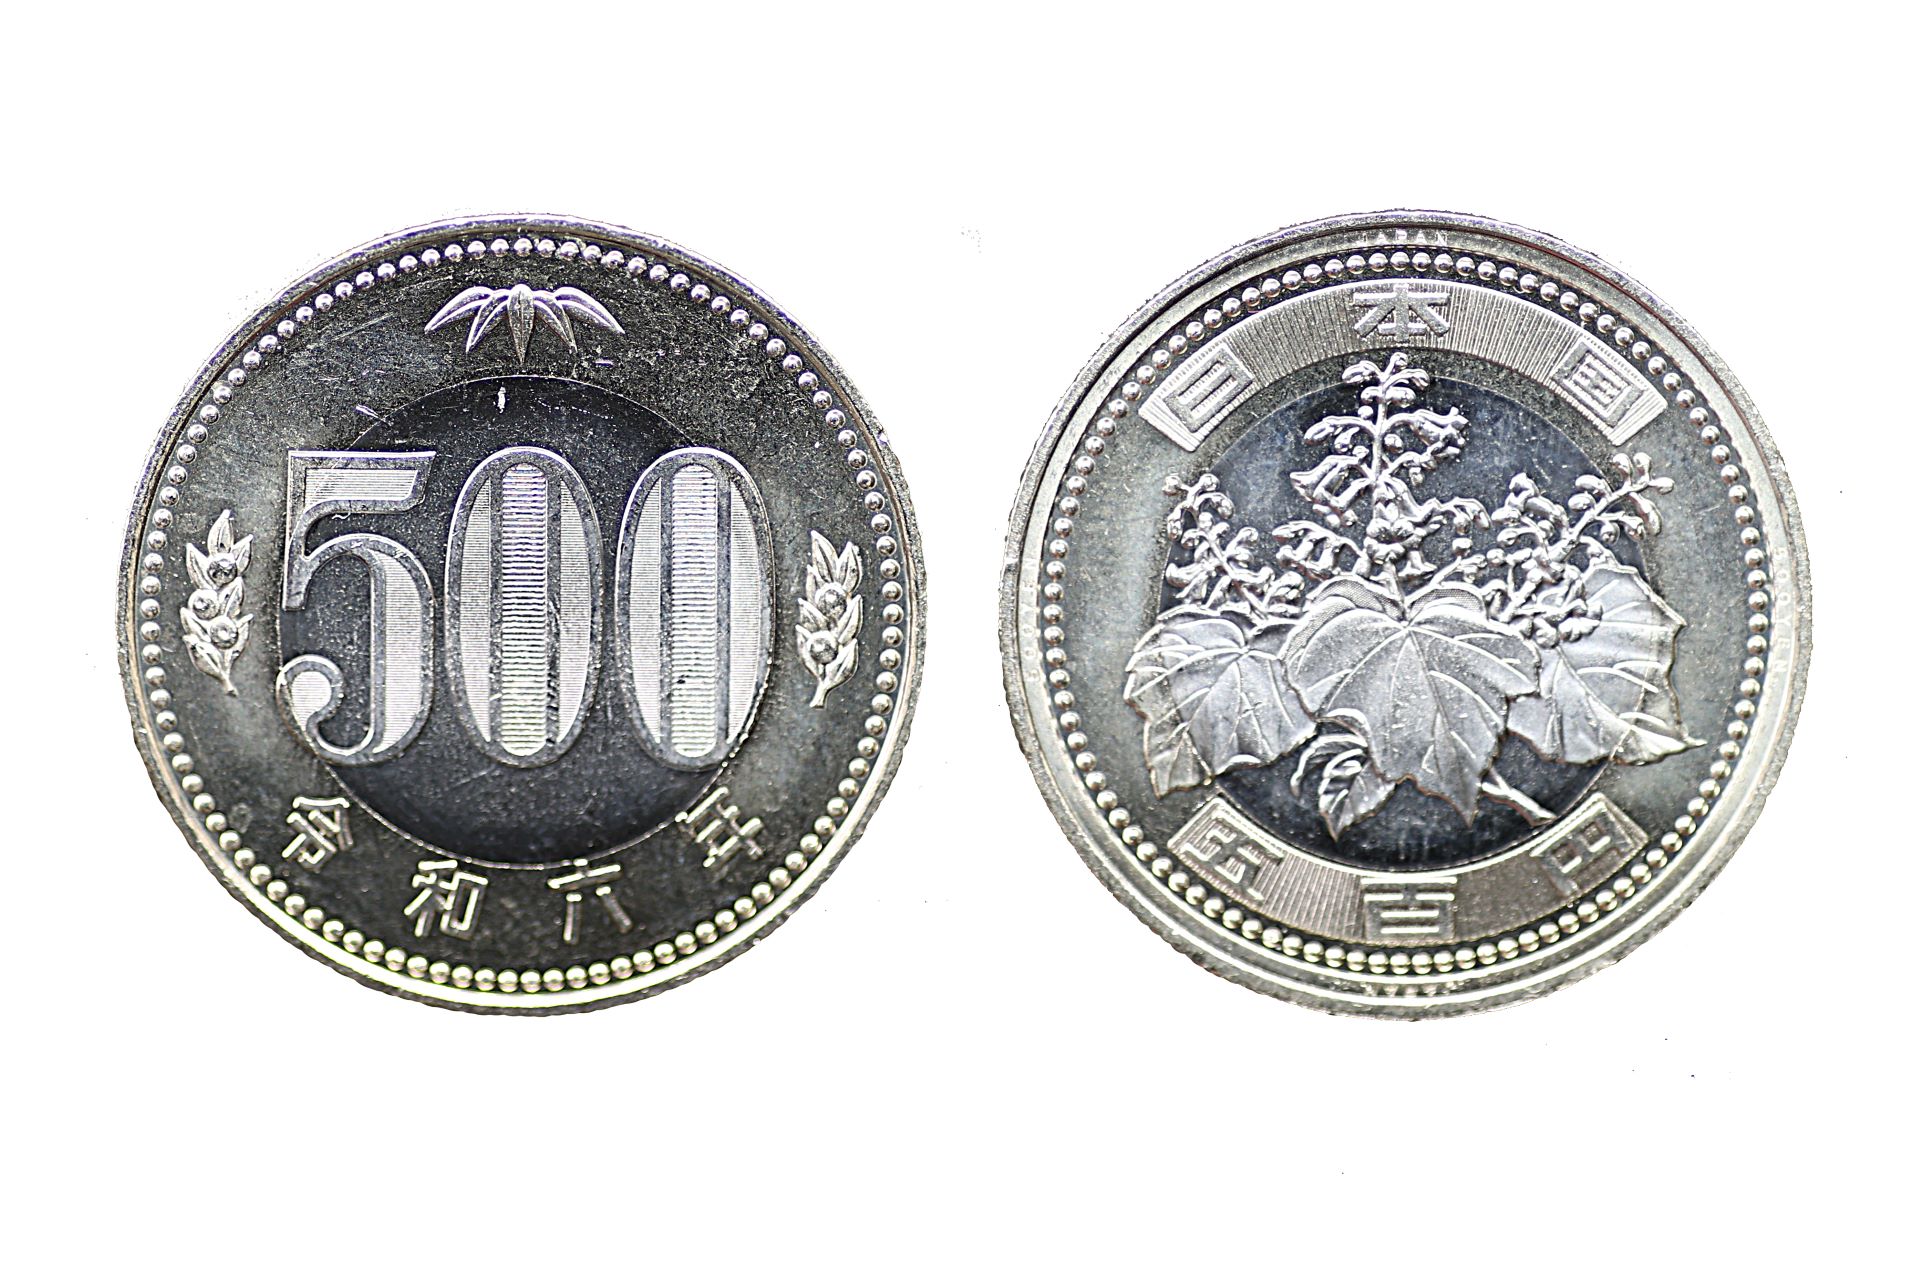 new 500 yen coin issued in 2021